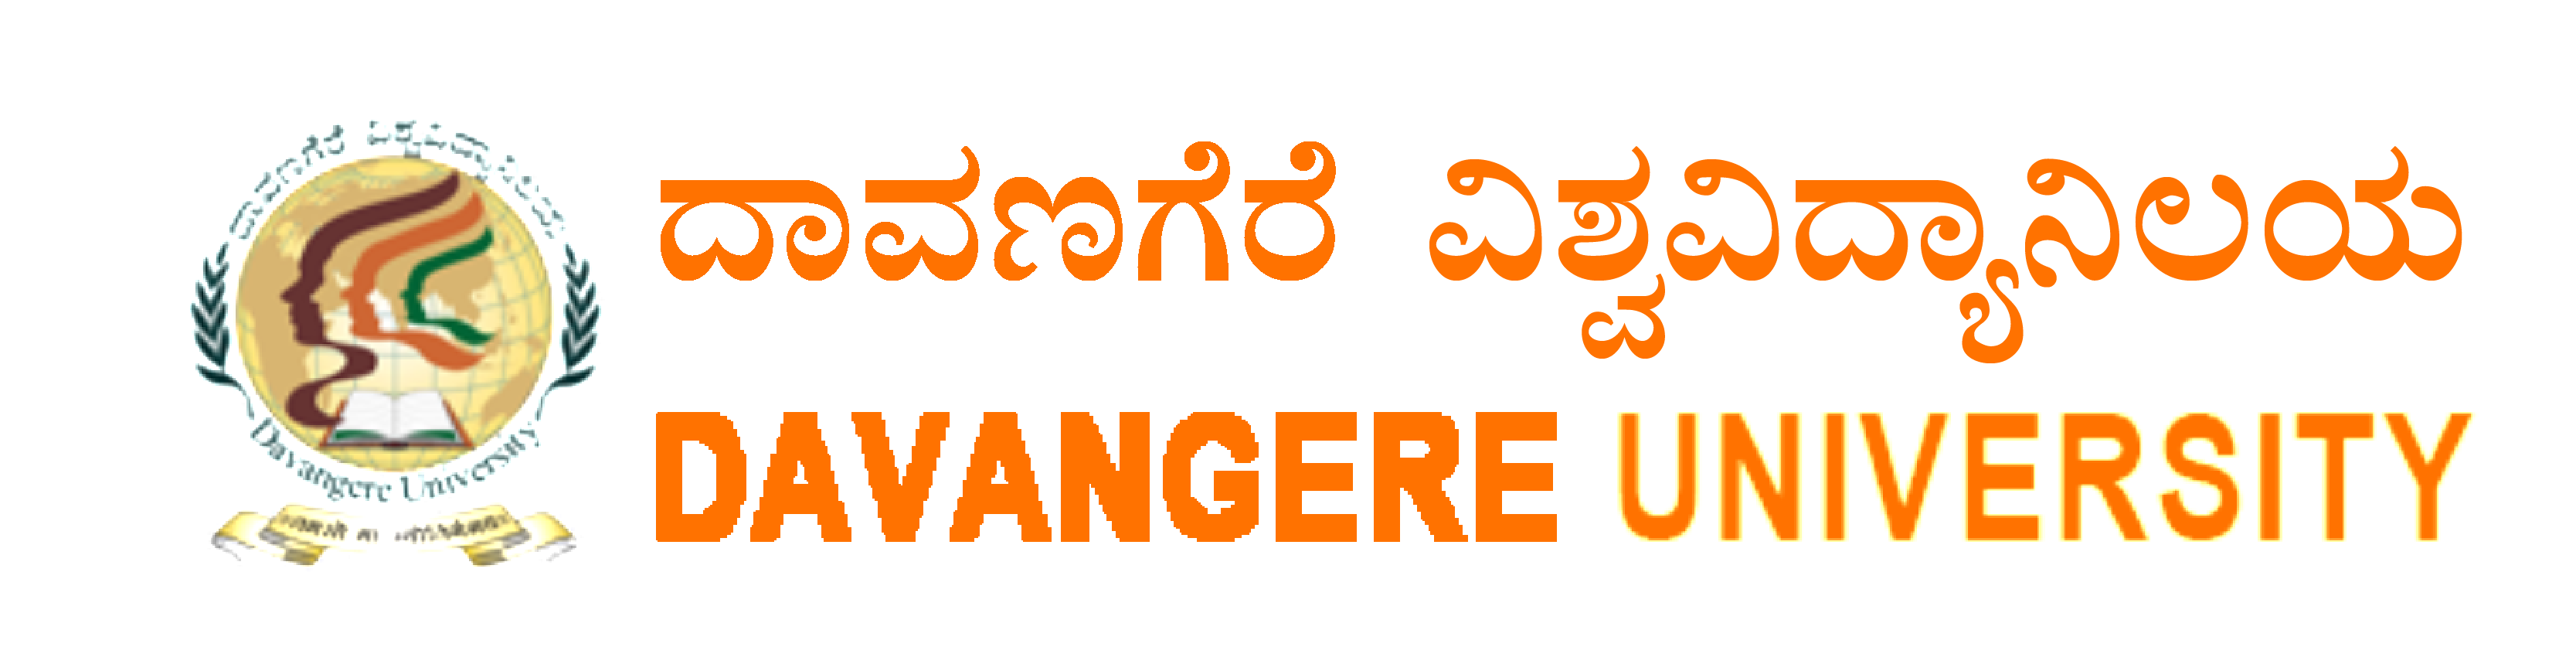 Davanagere University Courses and Syllabus [year] - Download UG, PG Syllabus 1